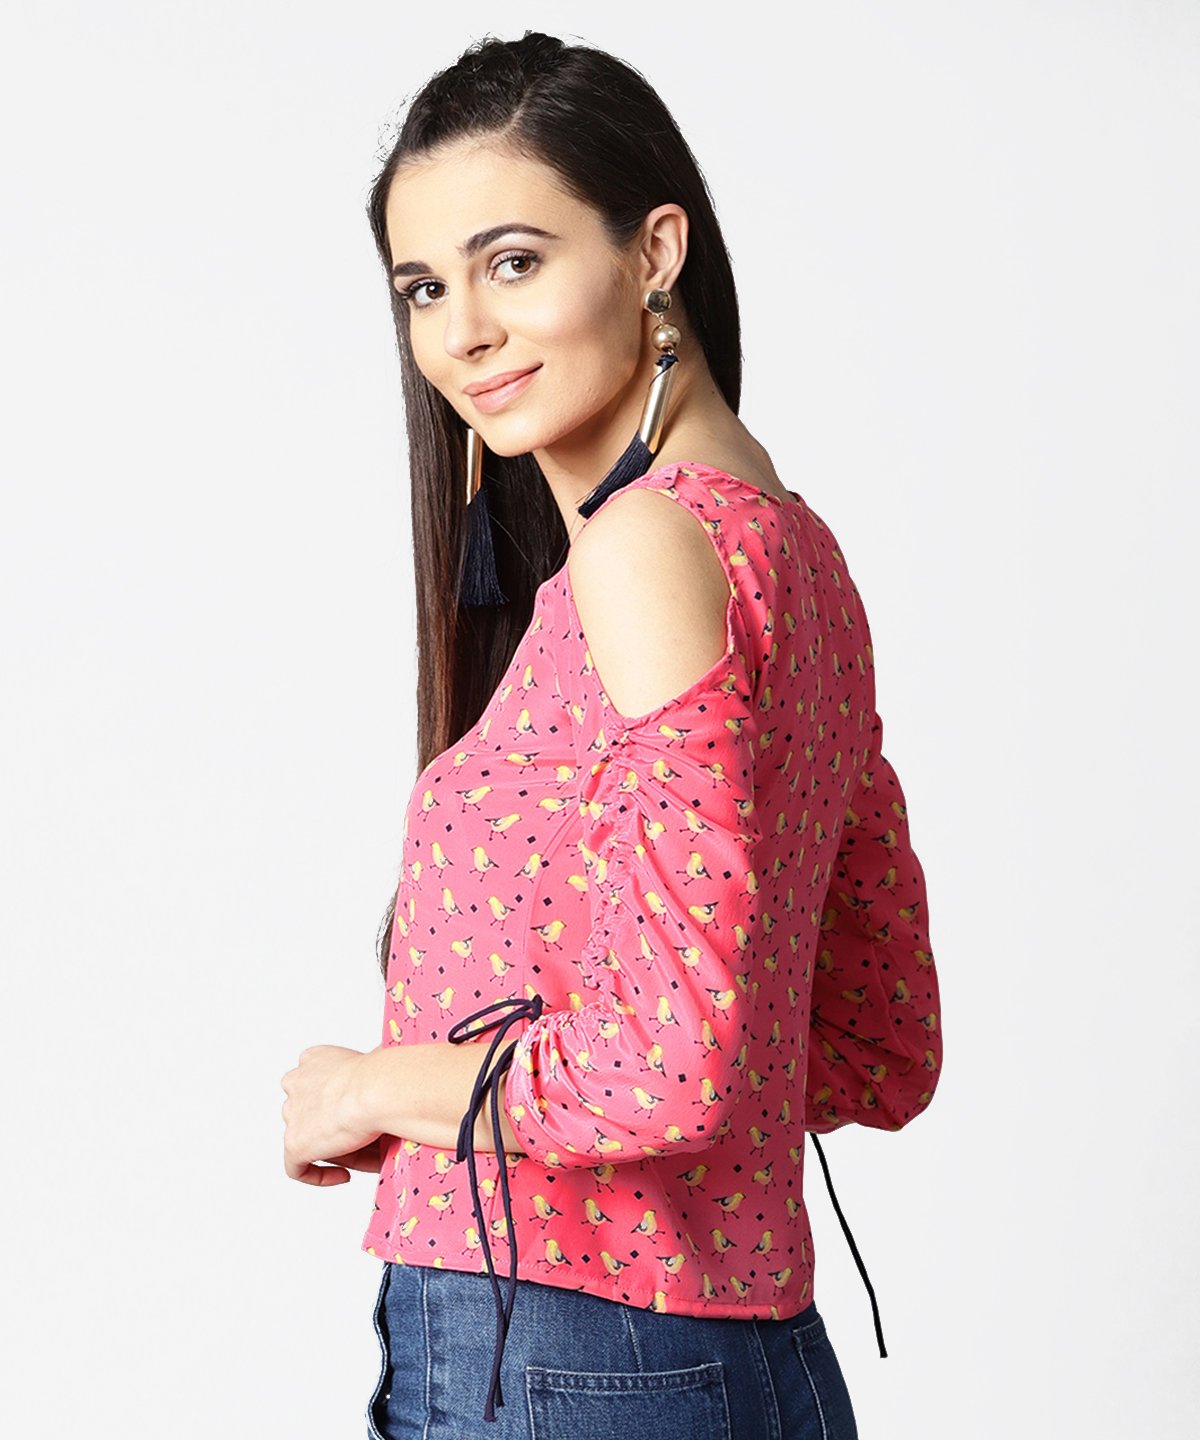 Women's Pink Printed Cold Shoulder Top With Key Hole Neck & Adjustable Drawstrings Gathered Sleeves - Nayo Clothing